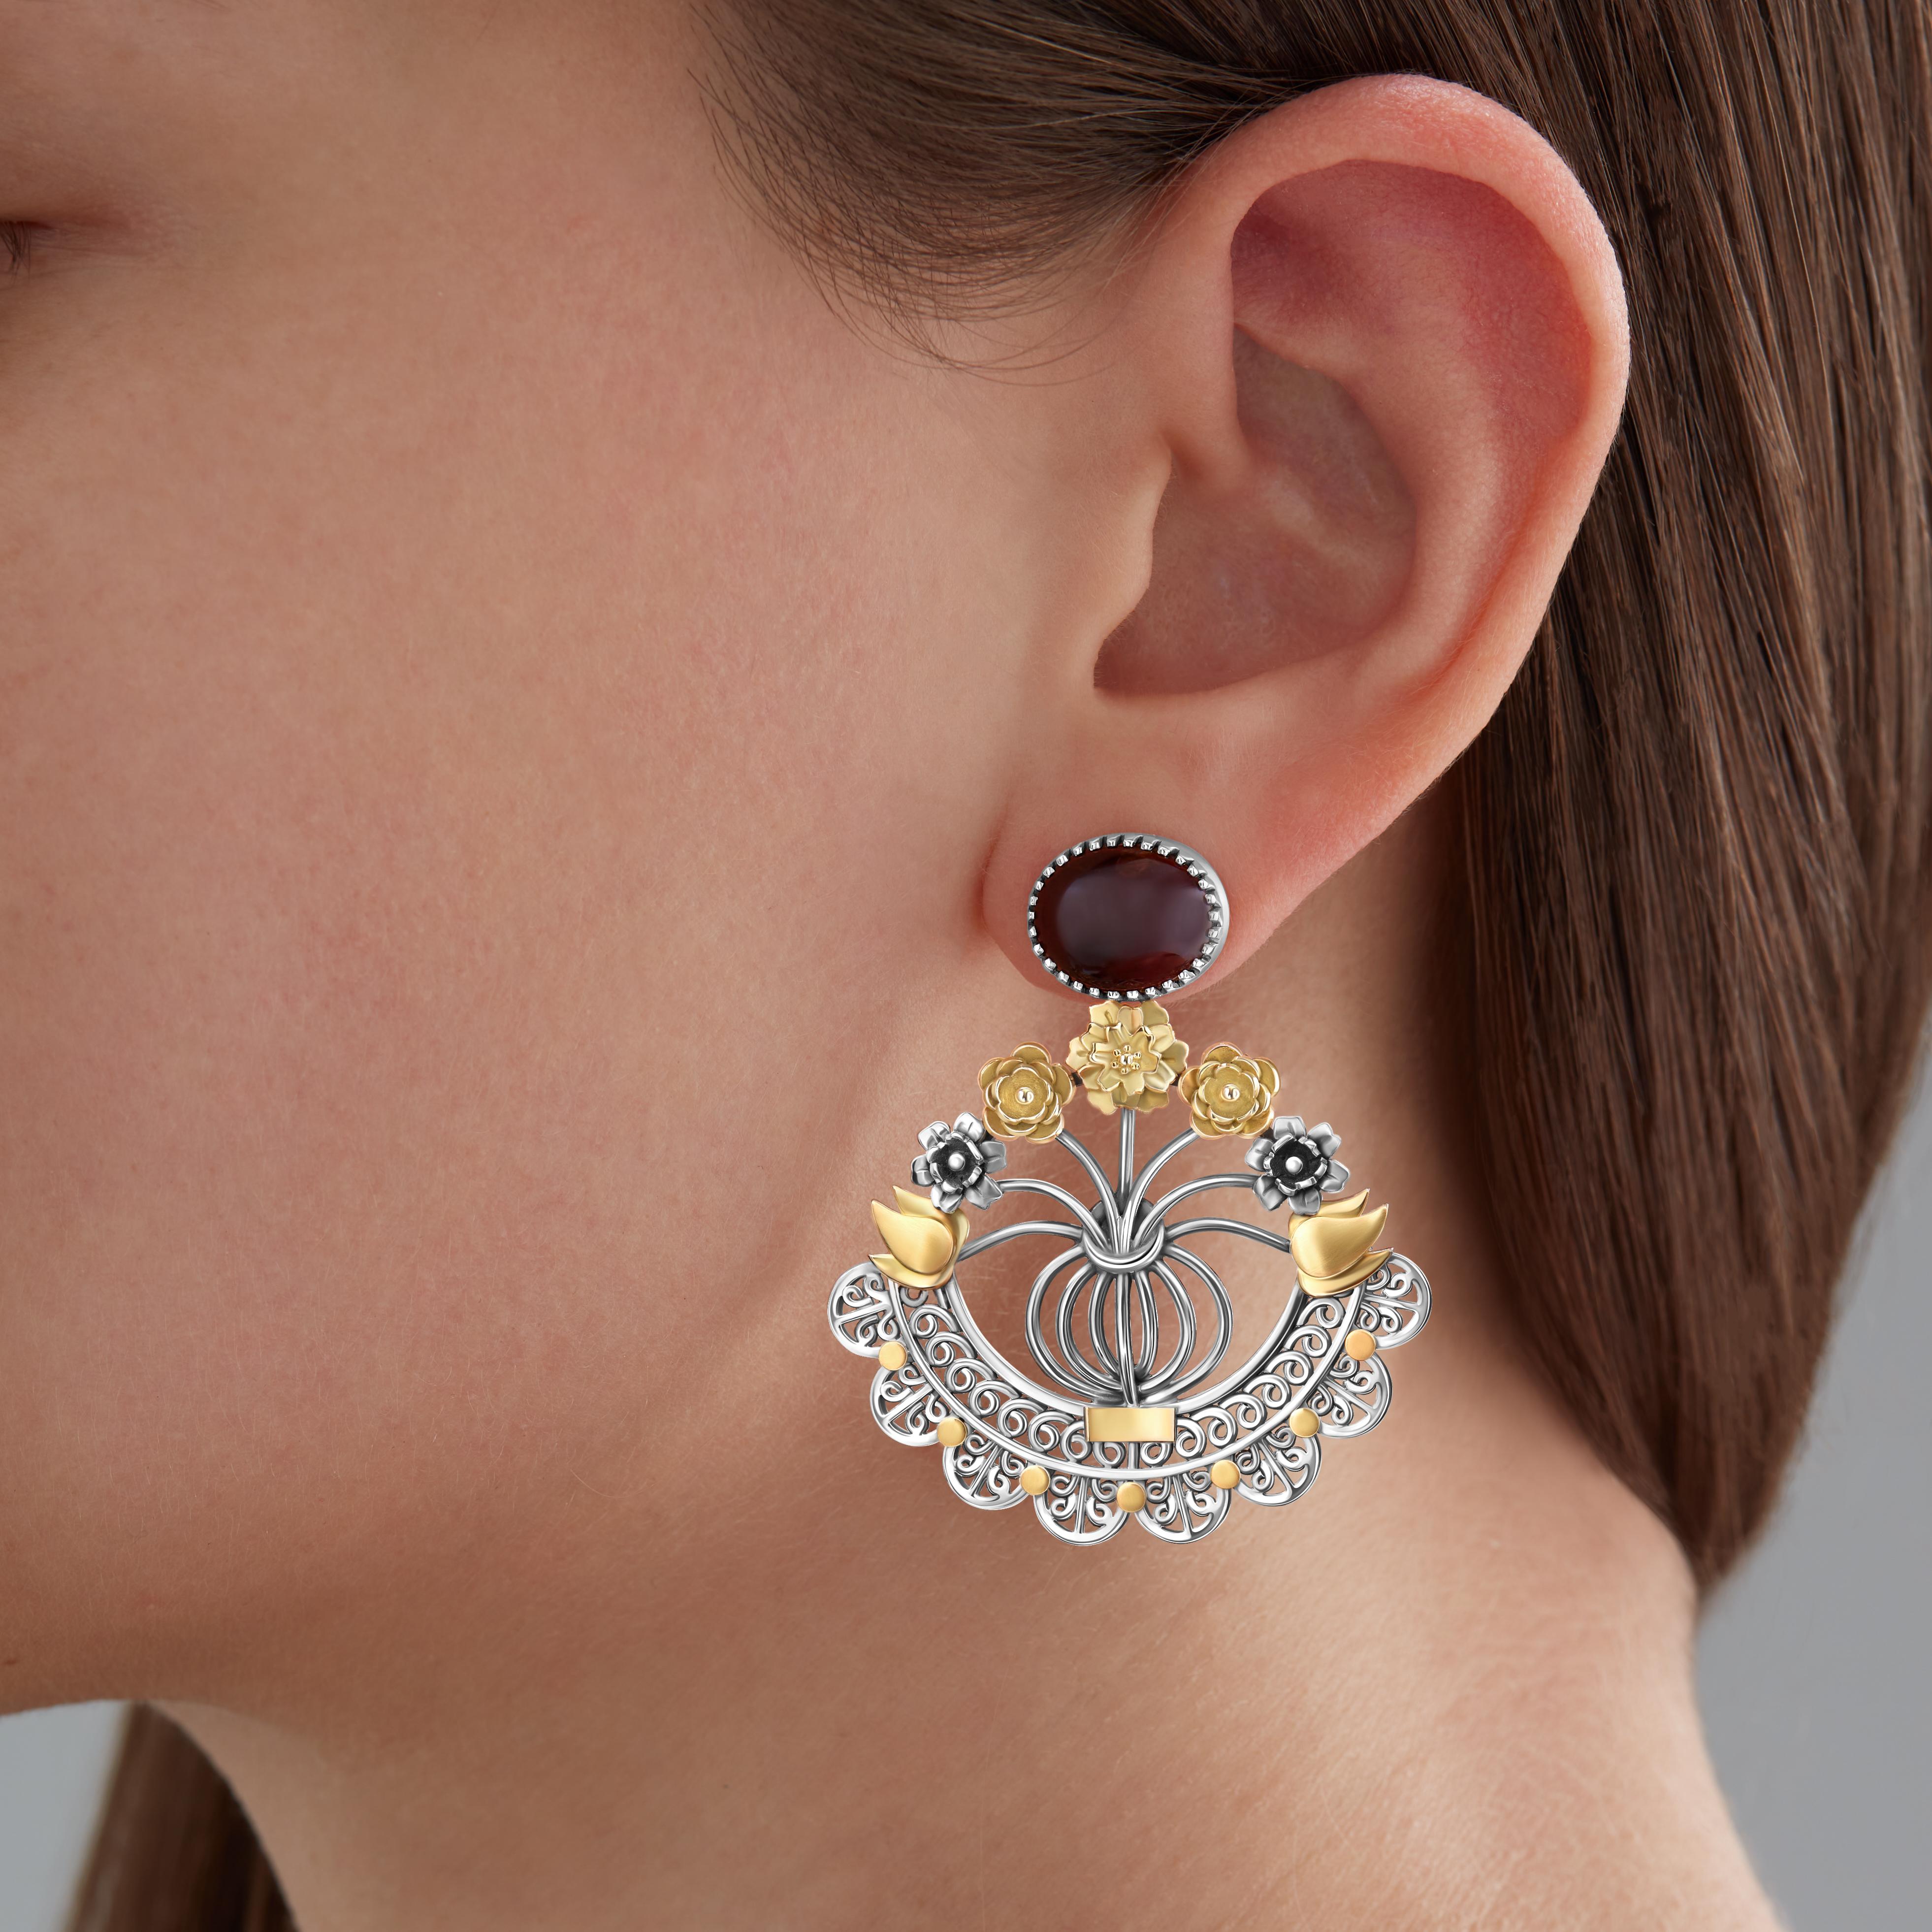 Sterling Silver, 18 Karat Gold and Cabouchon Red Tourmaline Floral Bouquet Statement Earrings featuring one-of-a-kind stones that are unique in colour, shape and size. Making each pair distinct, no two pairs are alike. The vase-like design swings